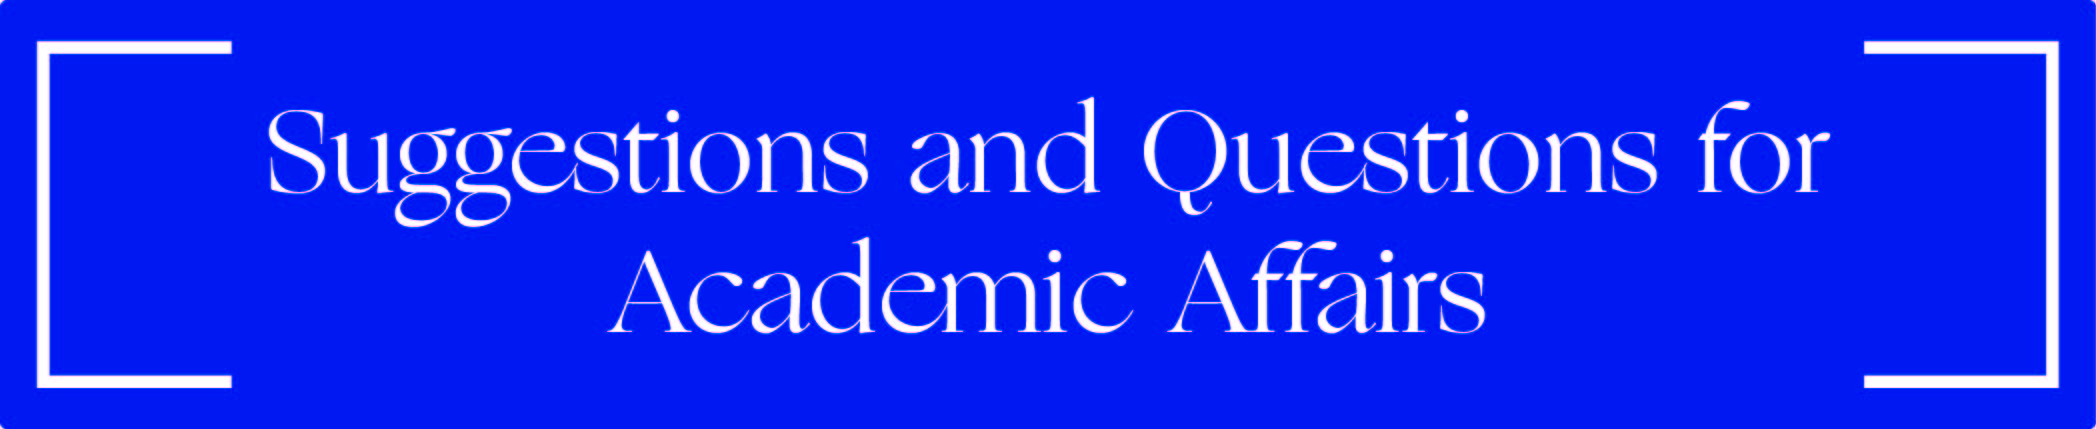 Suggestions and Questions for Academic Affairs banner image